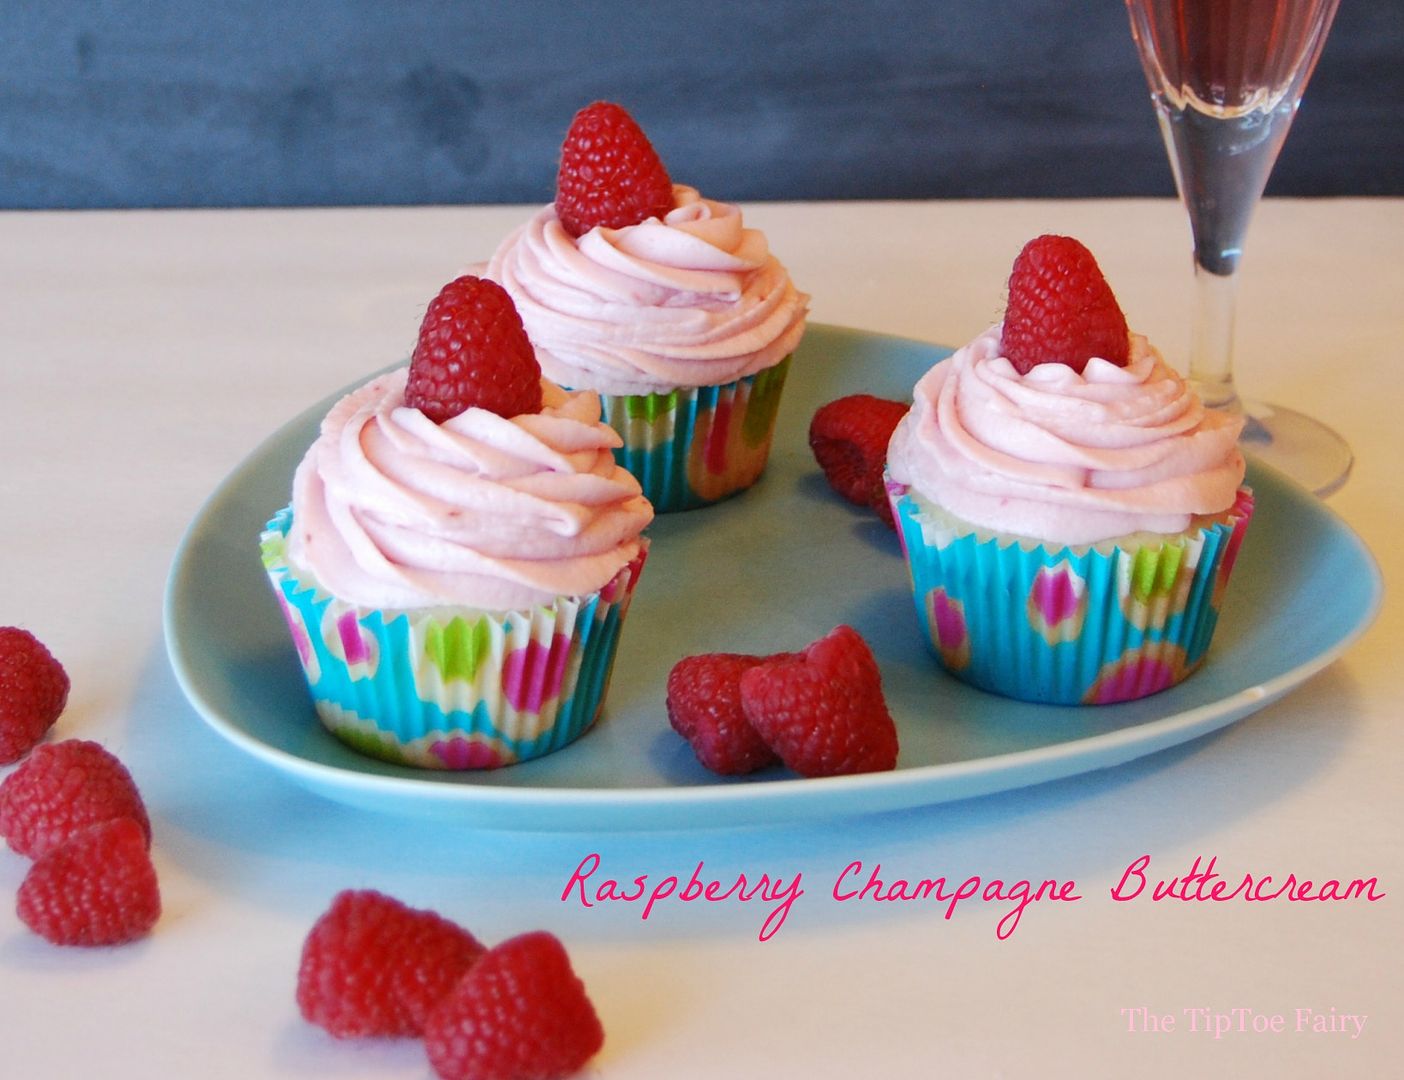 Raspberry Champagne Buttercream Frosting